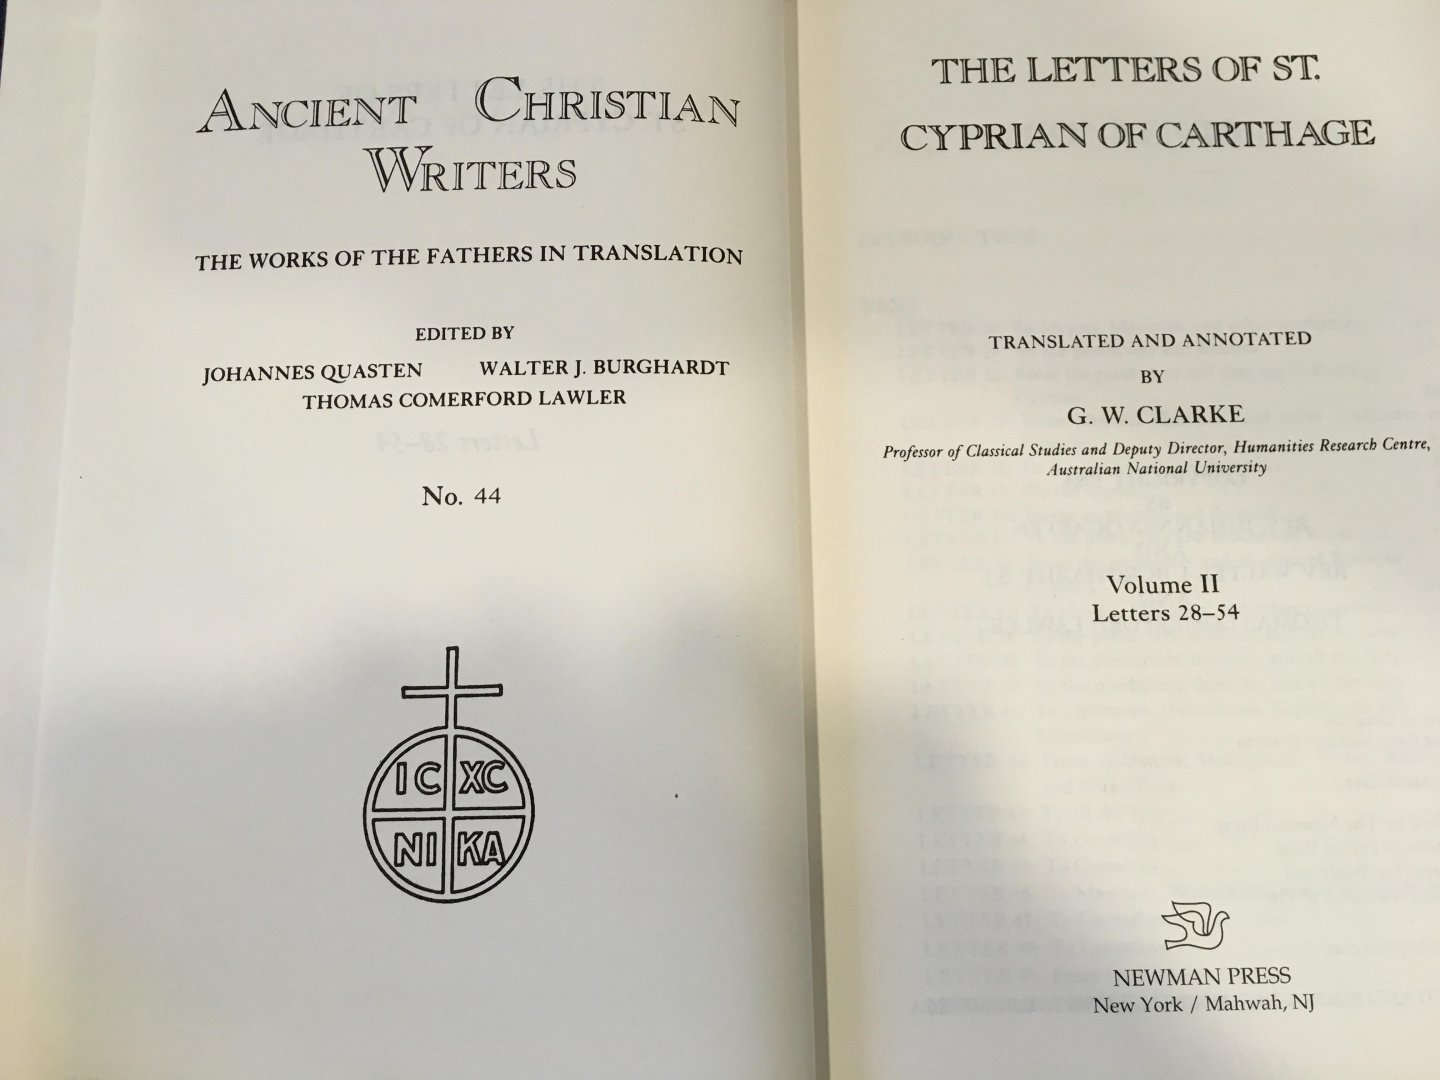 Clarke, G. W. - The Letters of St. Cyprian of Carthage vol II